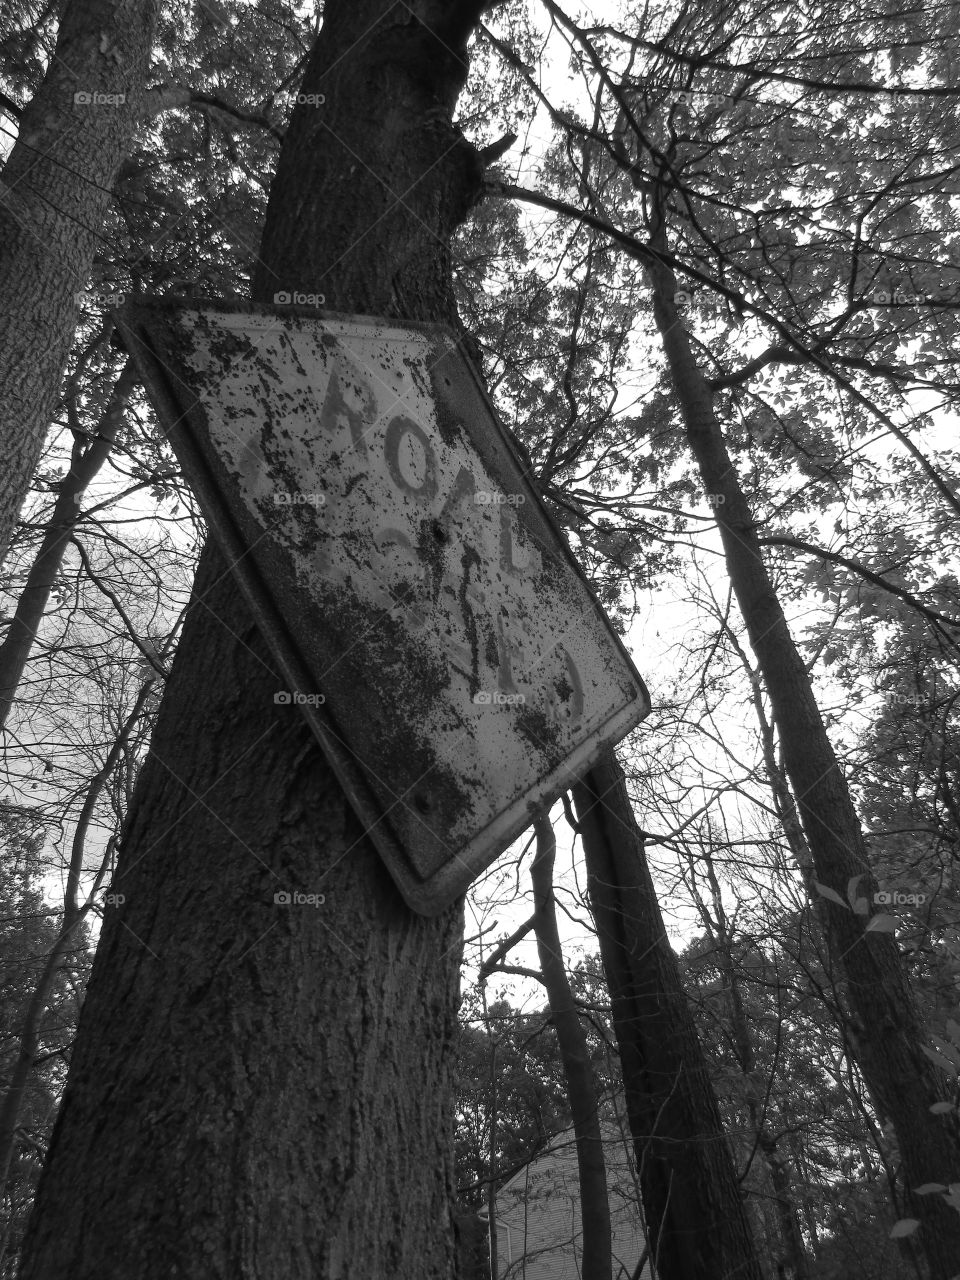 Rusted road closed sign in the woods, black and white